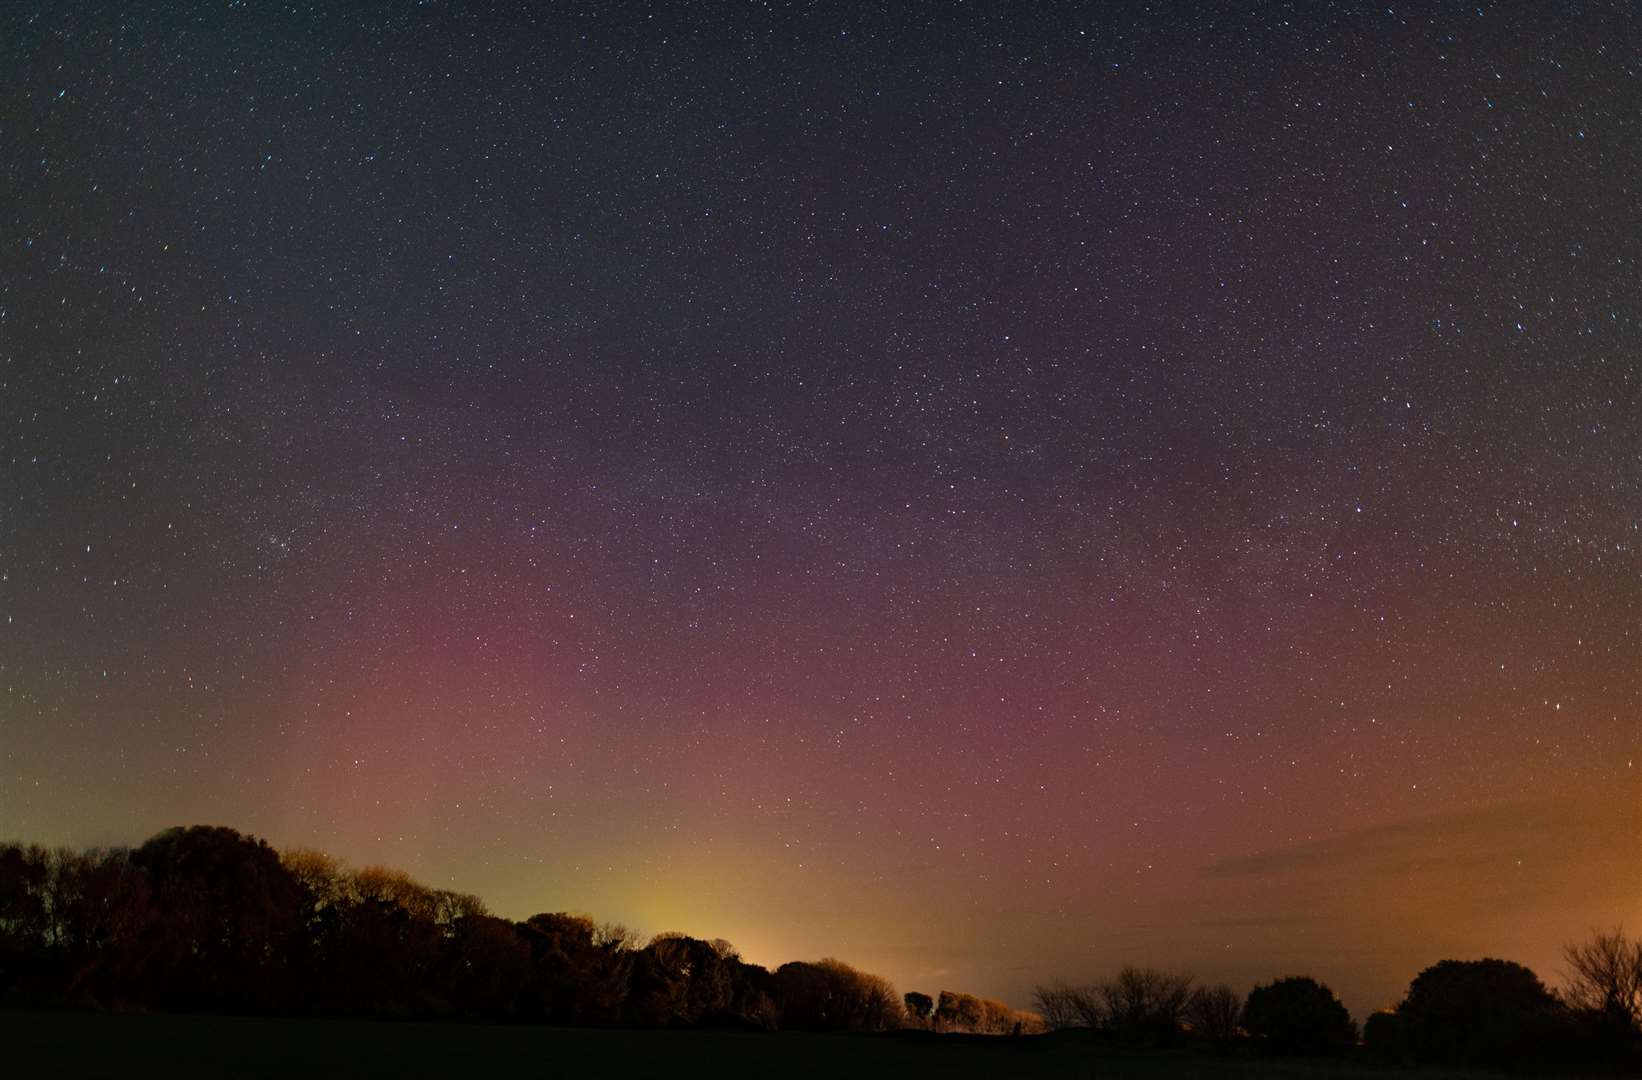 Northern Lights captured in sky over Kent by Ramsgate photographer ...